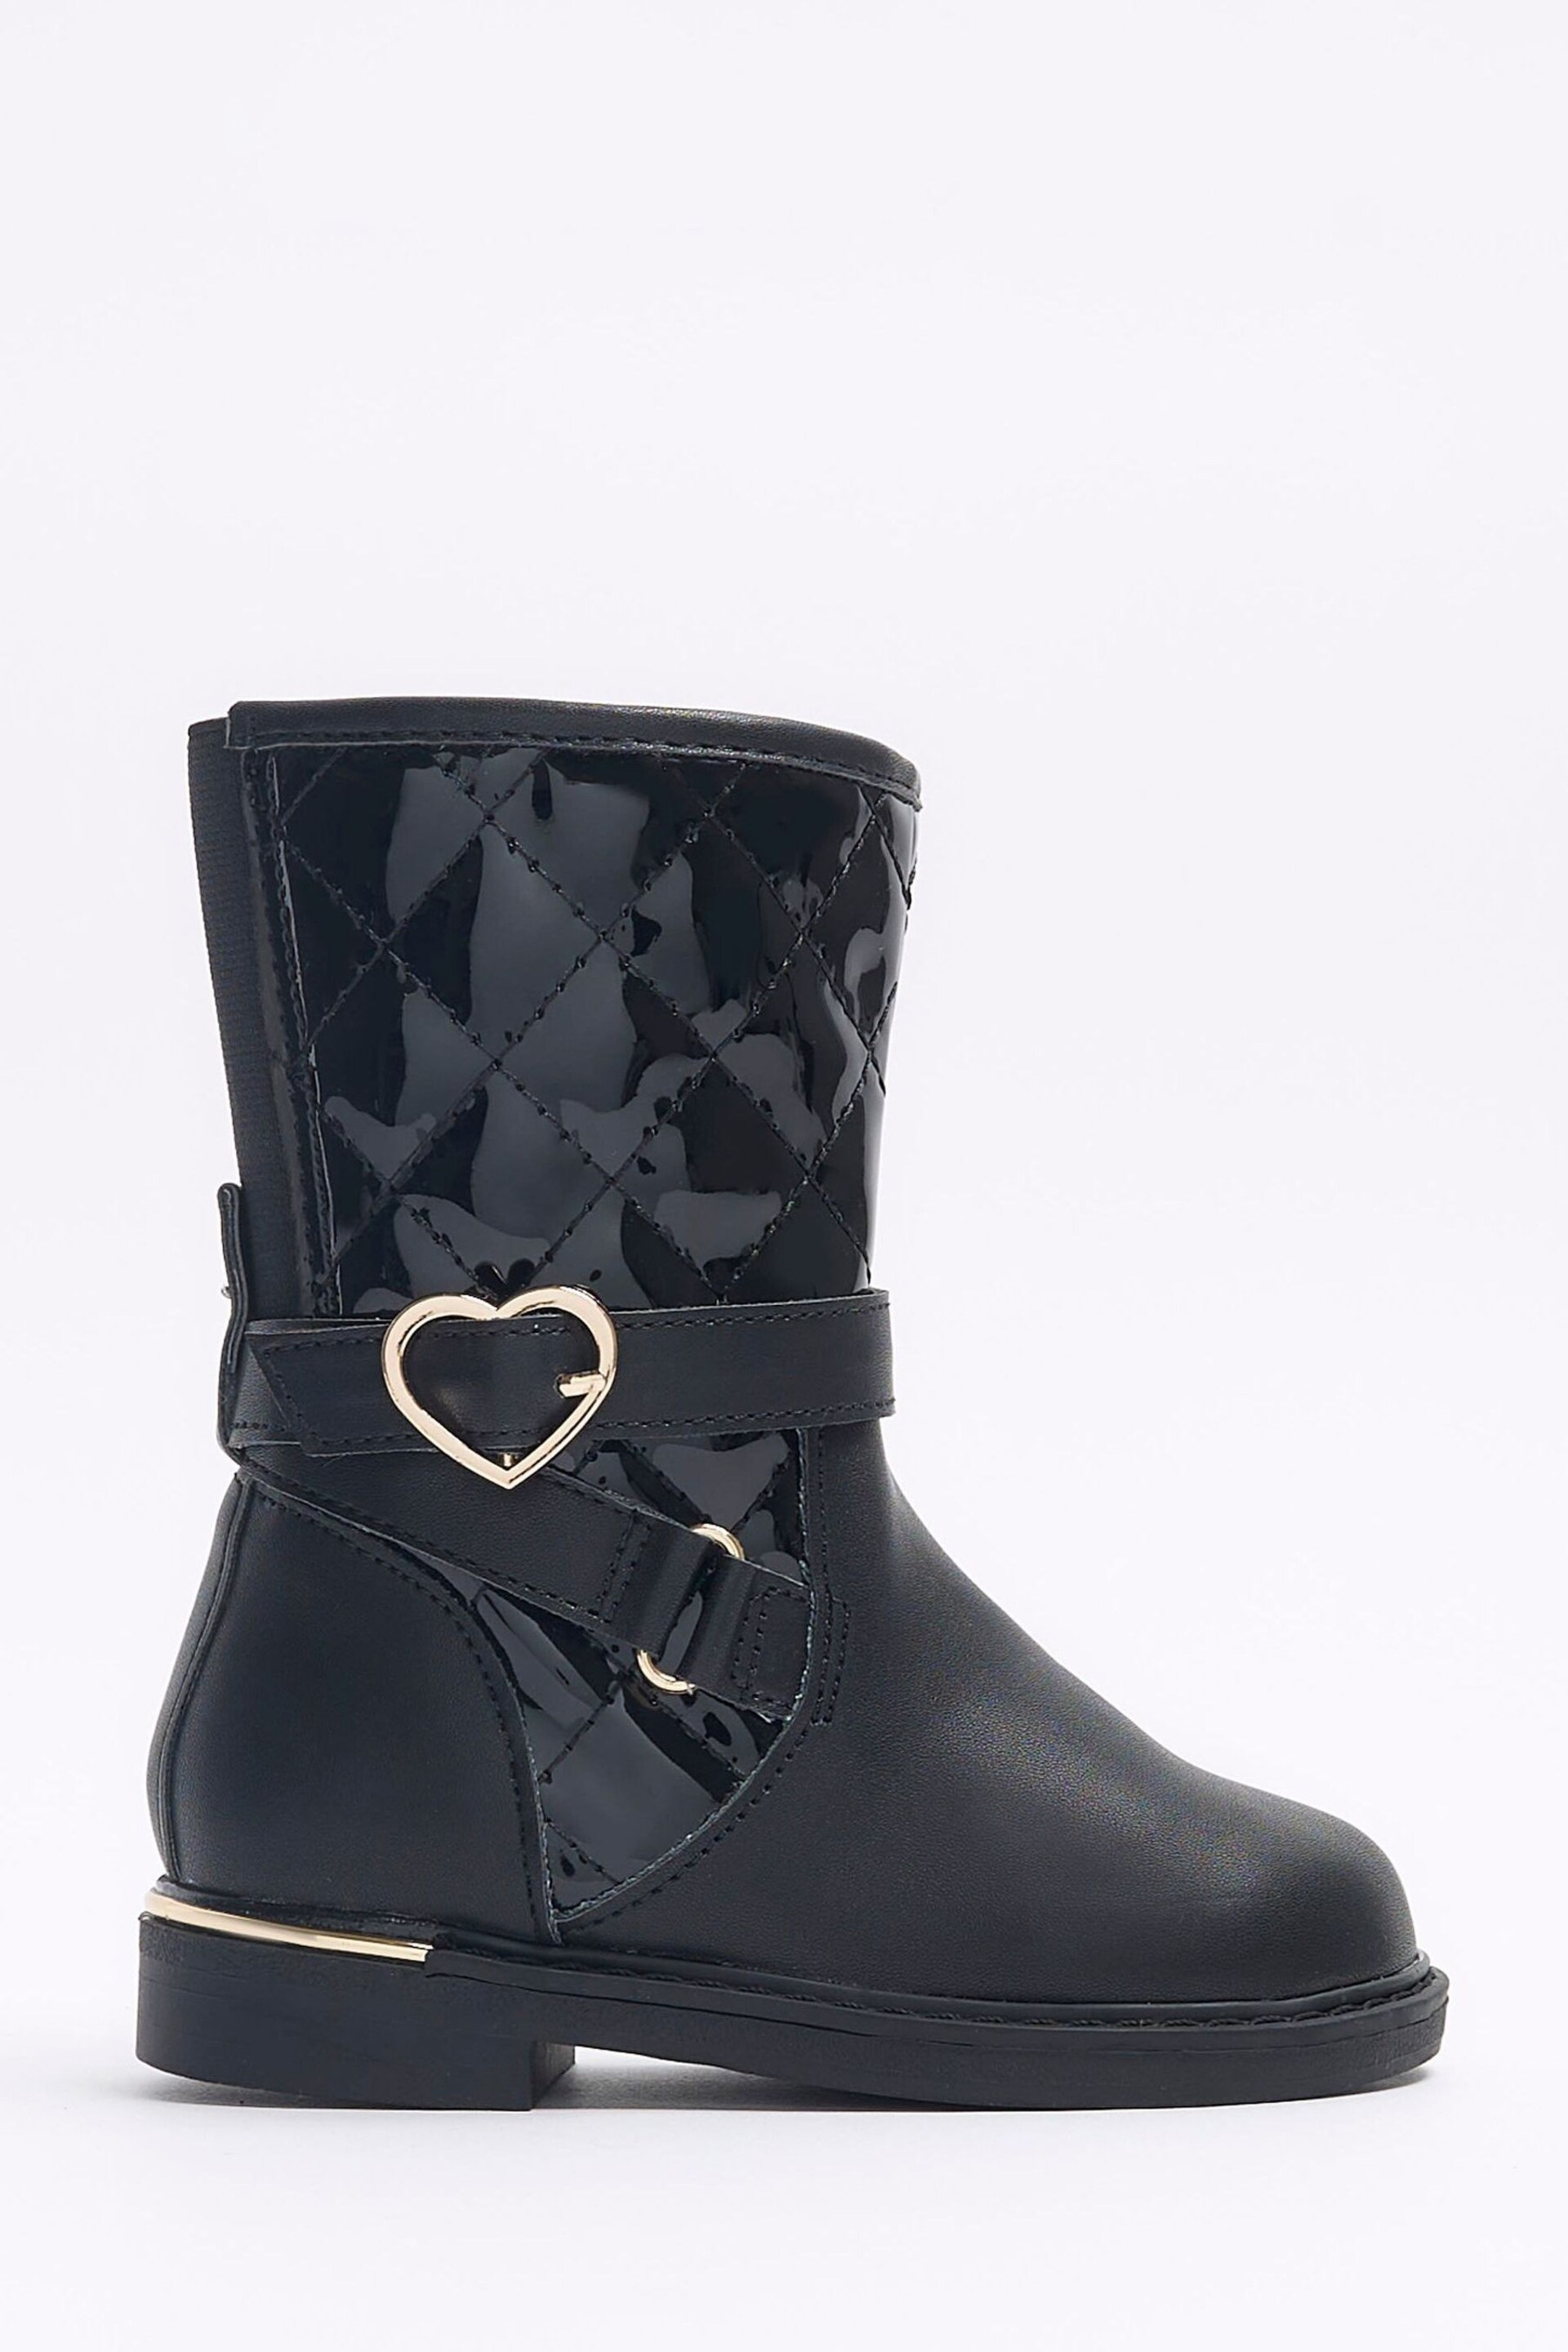 River Island Black Girls Heart Buckle Knee High Boots - Image 1 of 5